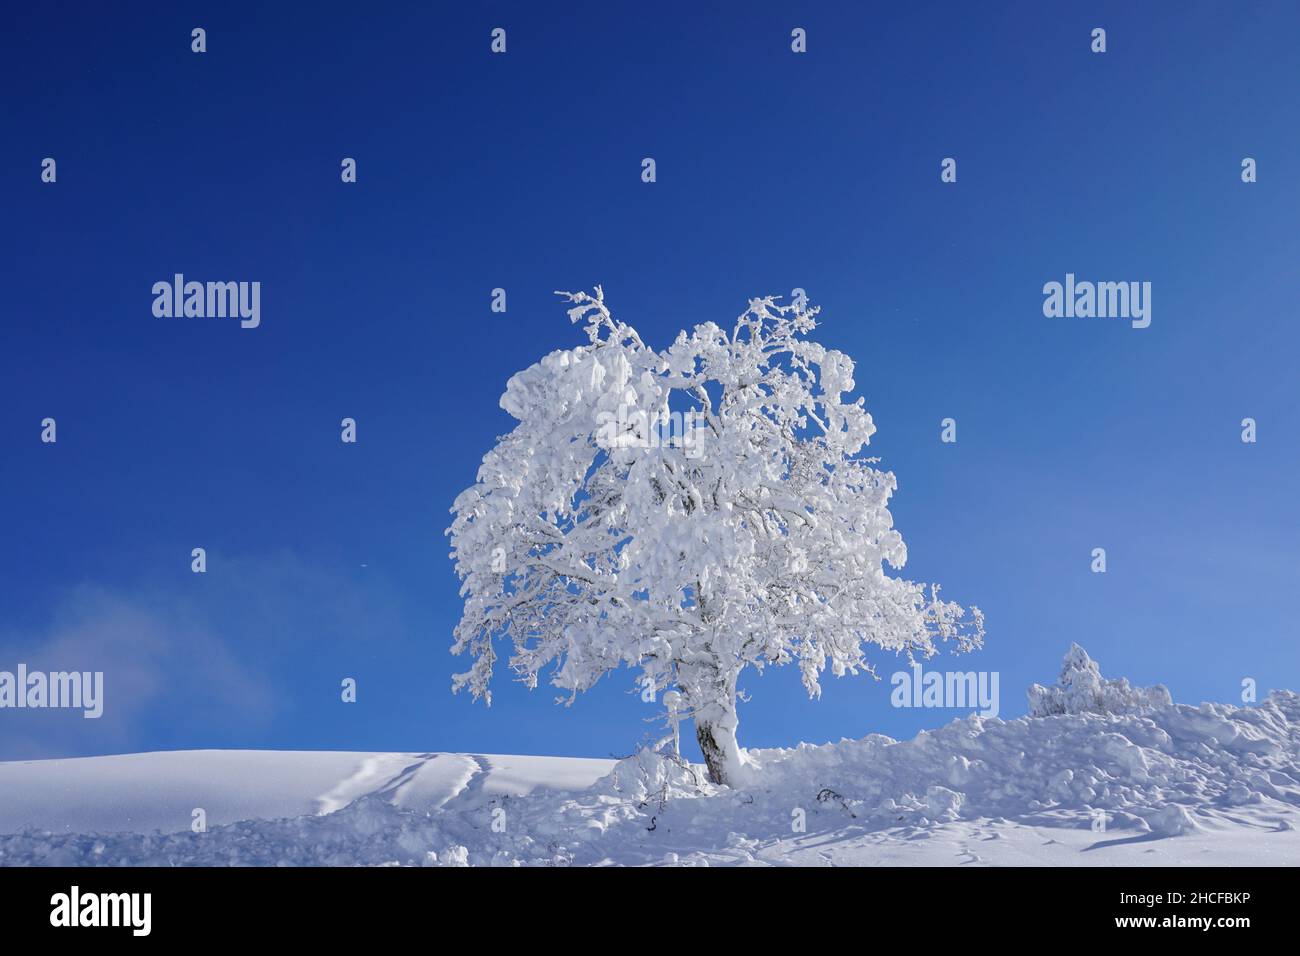 Powerful, snow-covered tree in the swiss winter wonderland seems like a caller in the dessert. Snow tracks in the deep snow show us the way. Stock Photo